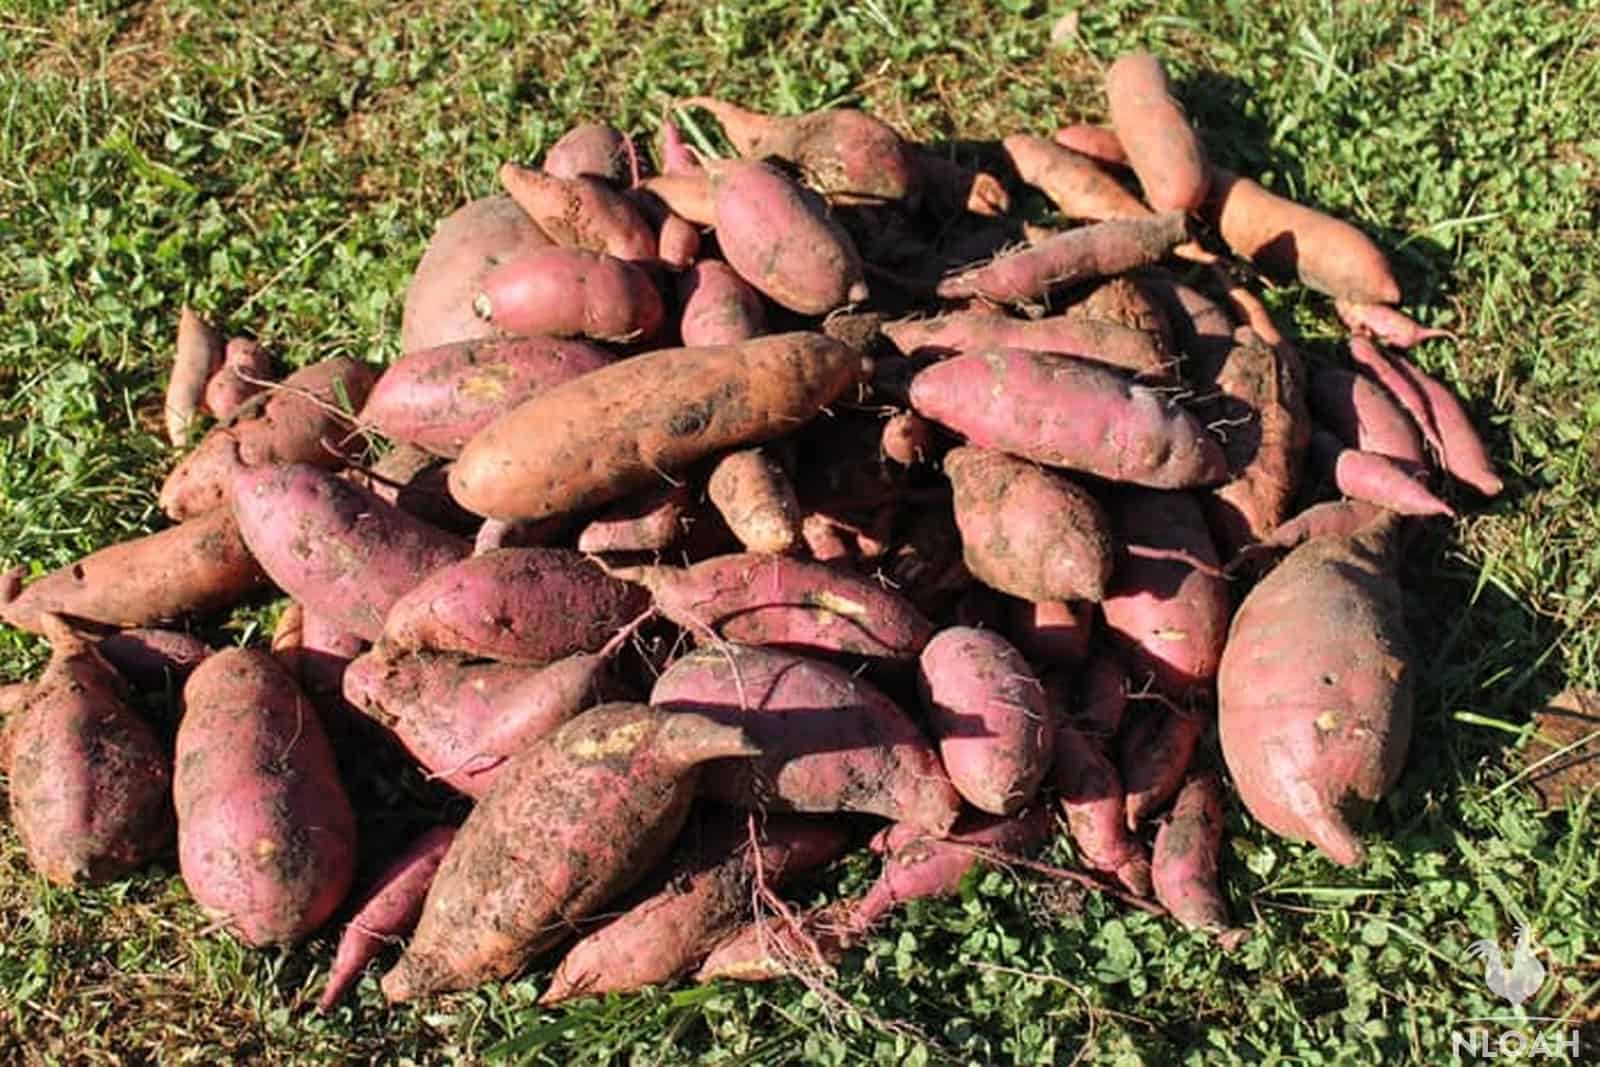 32 pounds of sweet potatoes from our first harvest